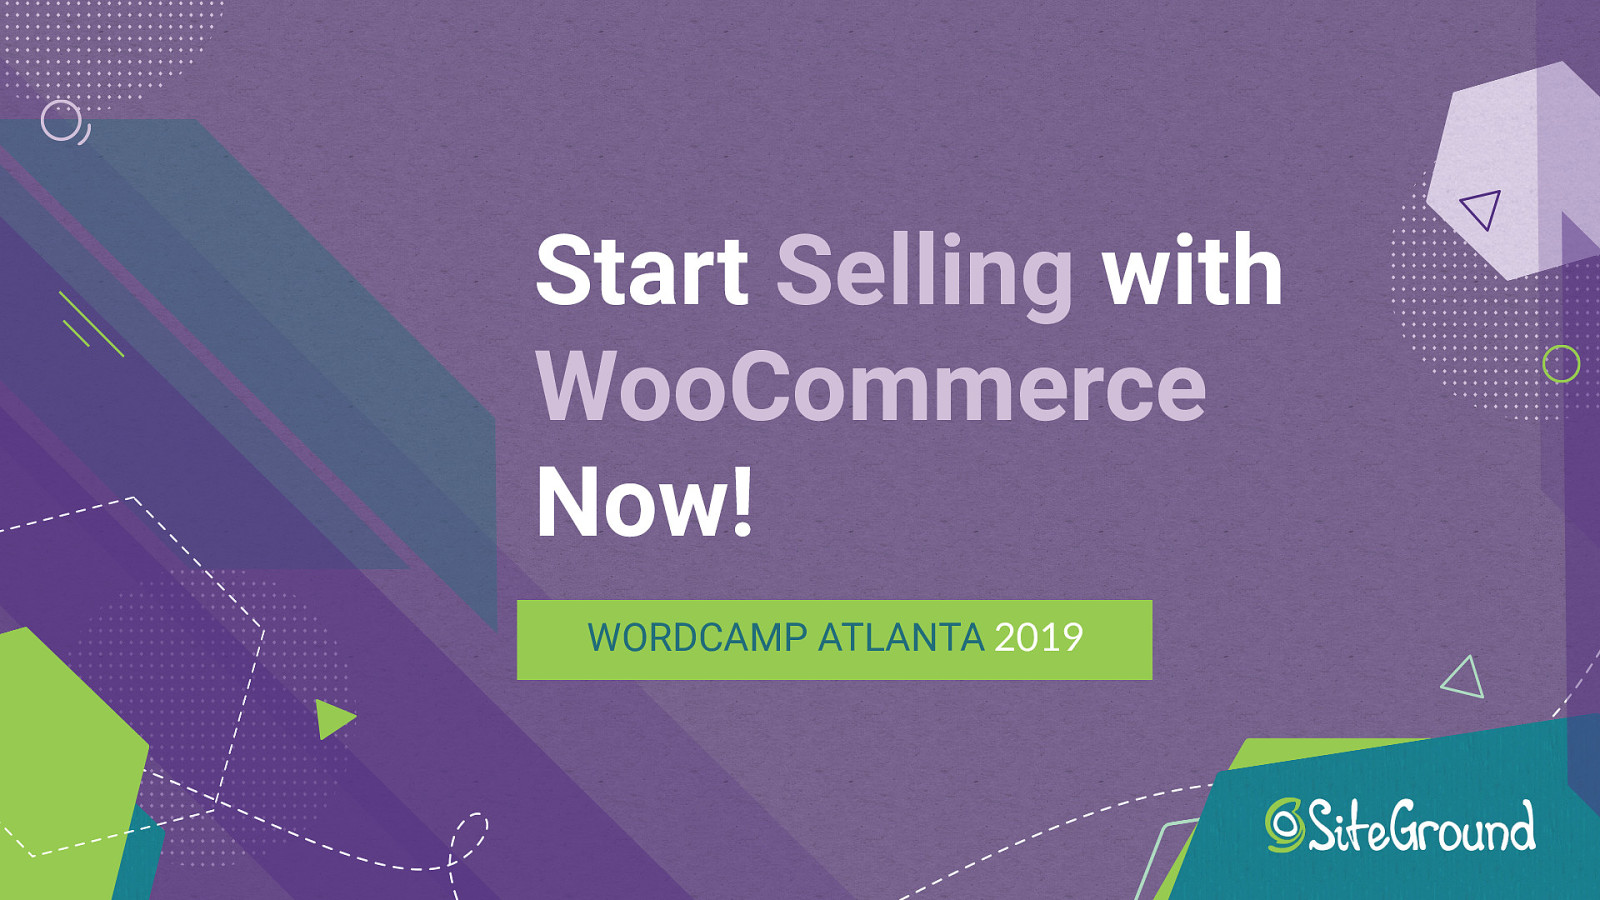 Start Selling With WooCommerce Now!